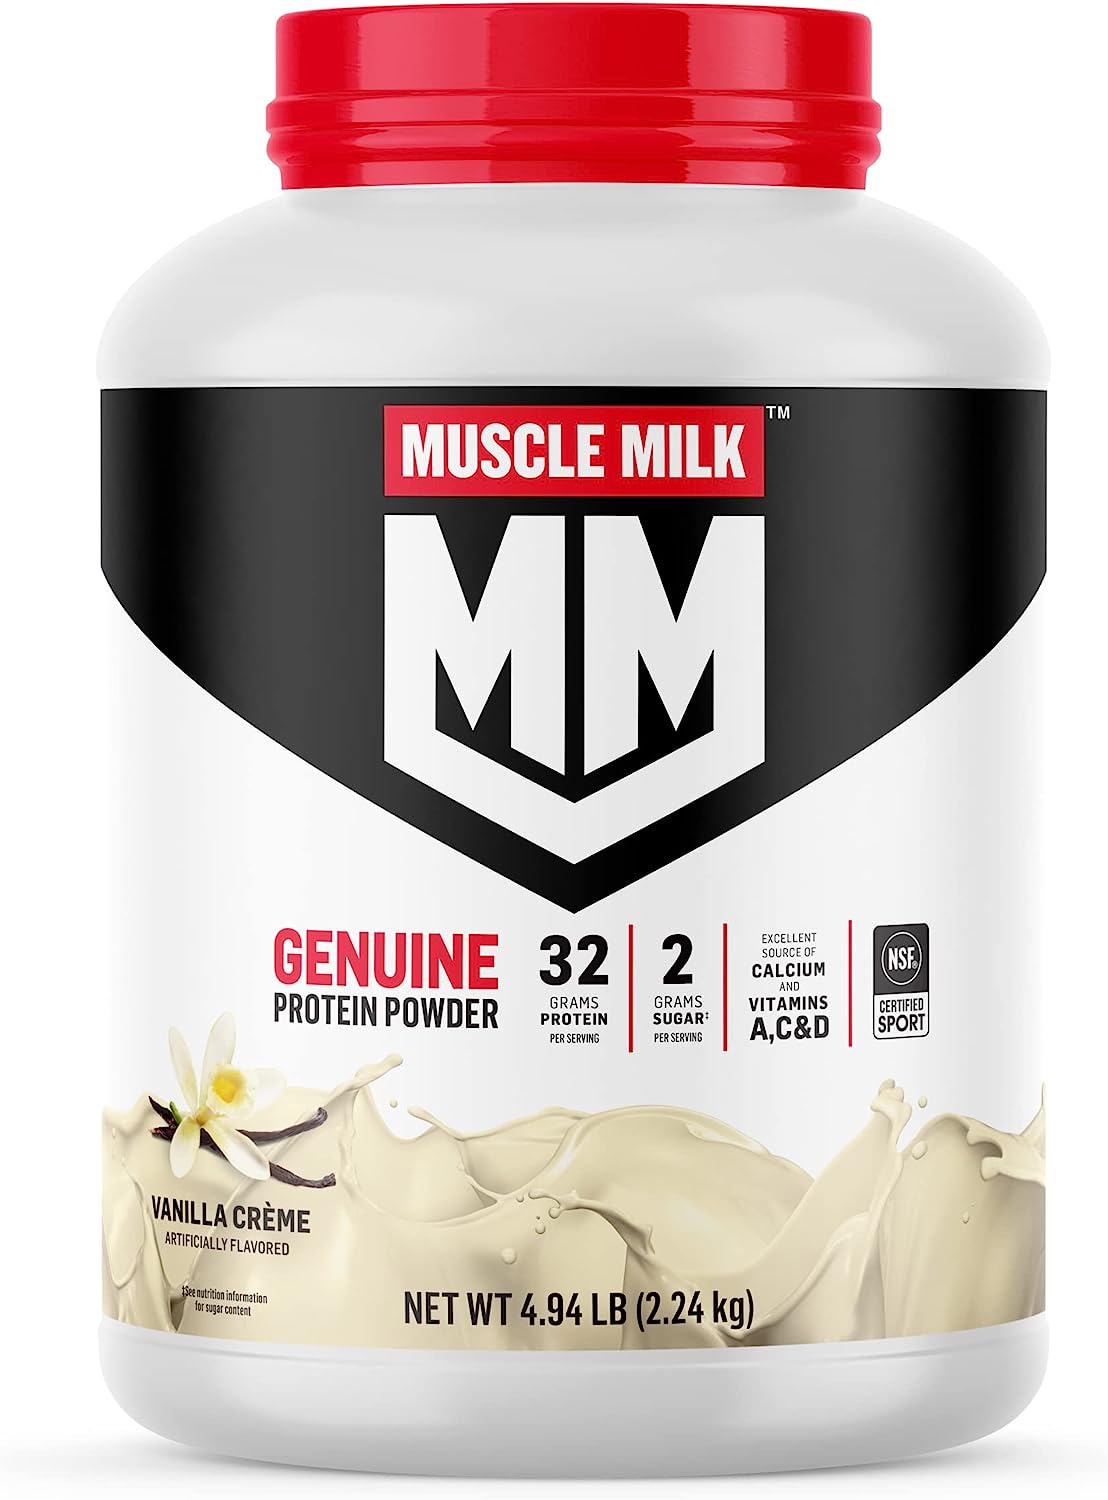 CytoSport Muscle Milk - A1 Supplements Store